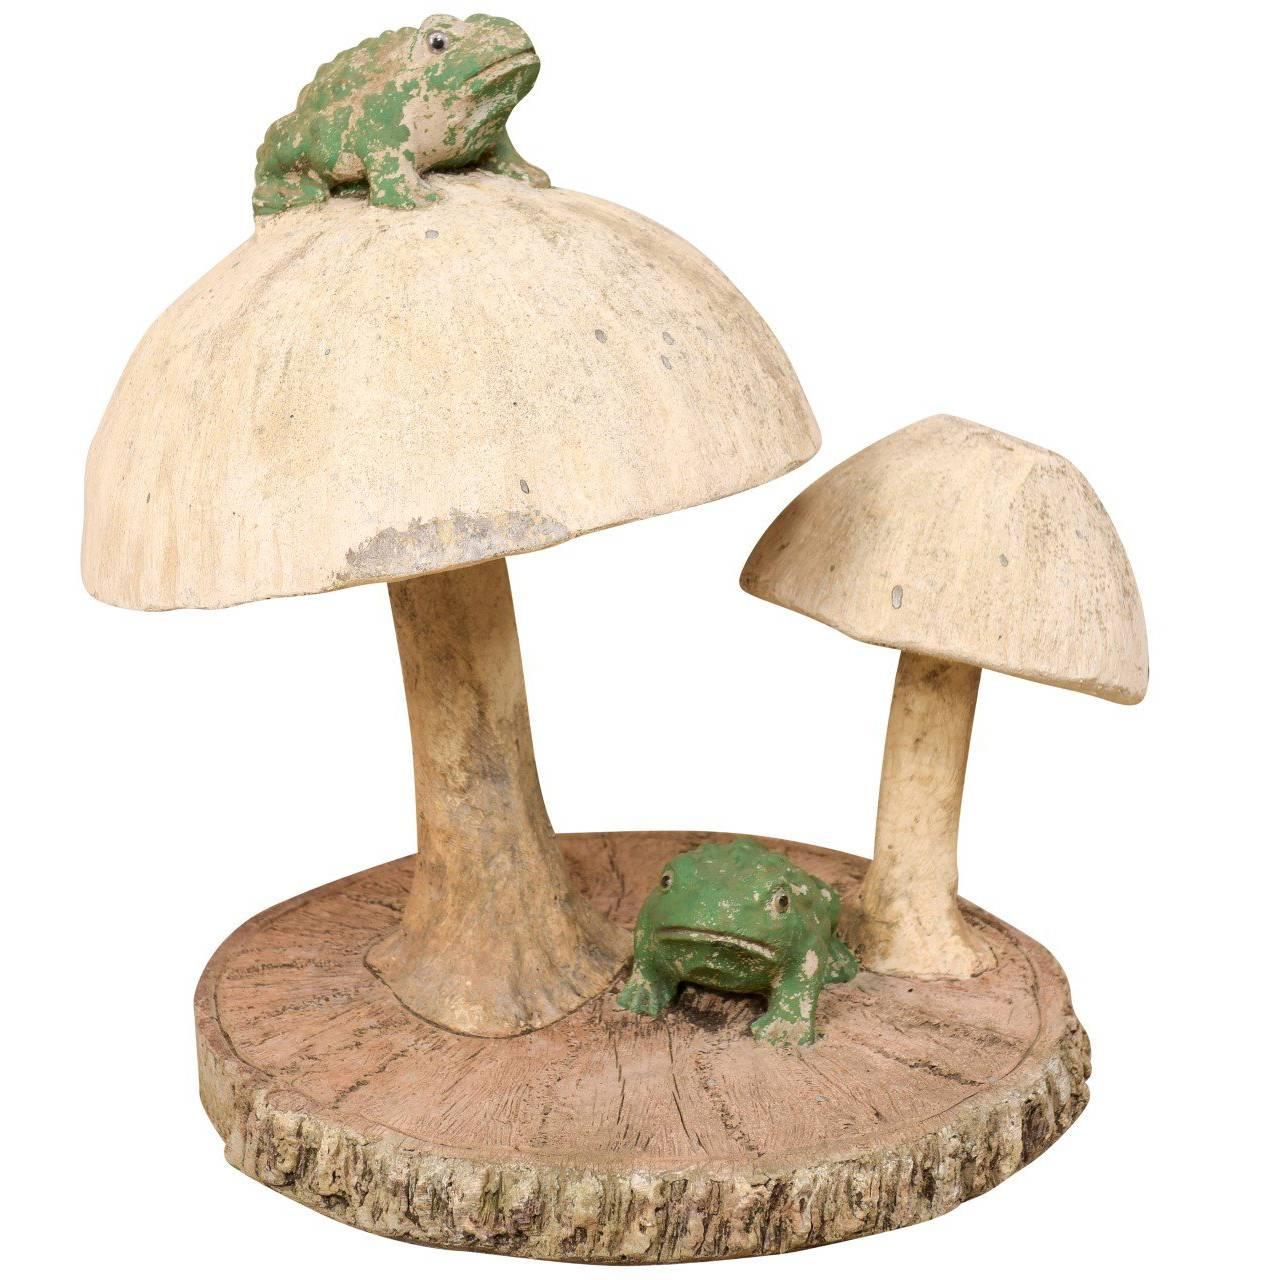 Fun Tall Mushrooms and Frogs Garden Sculpture on Faux Bois Slab Base